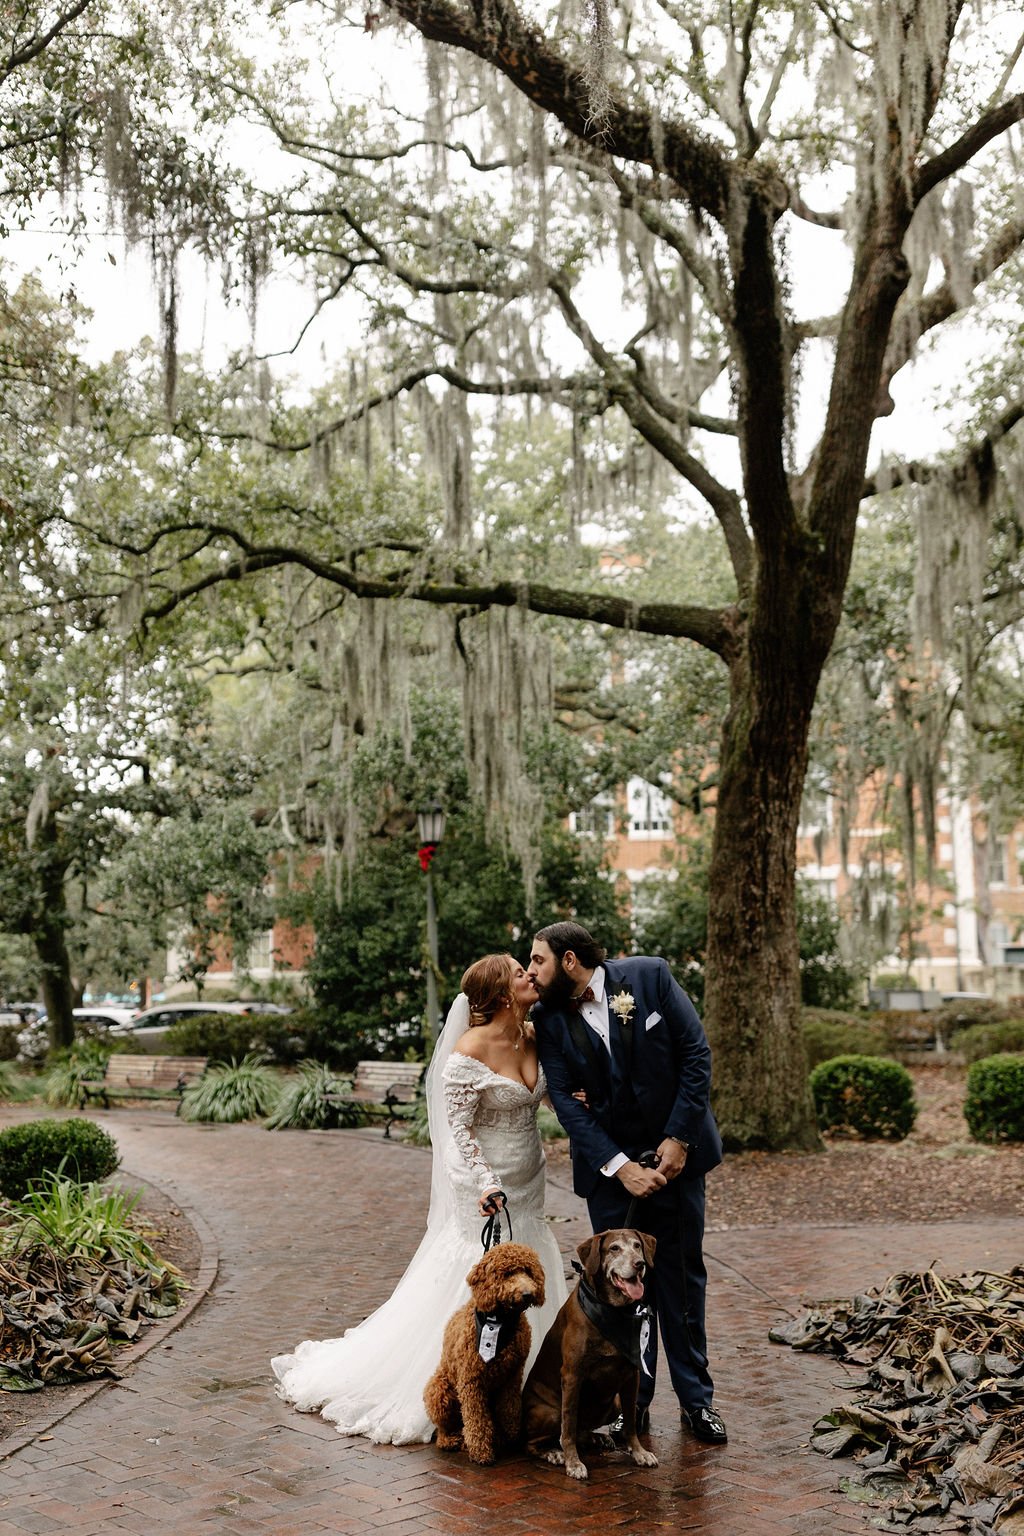 katie-and-zacks-boho-chic-new-years-eve-wedding-in-savannah-georgia-at-the-georgia-state-railroad-museum-and-the-perry-lane-hotel-featuring-wedding-florals-by-savannah-florist-ivory-and-beau-savannah-wedding-savannah-wedding-florist-23.jpg